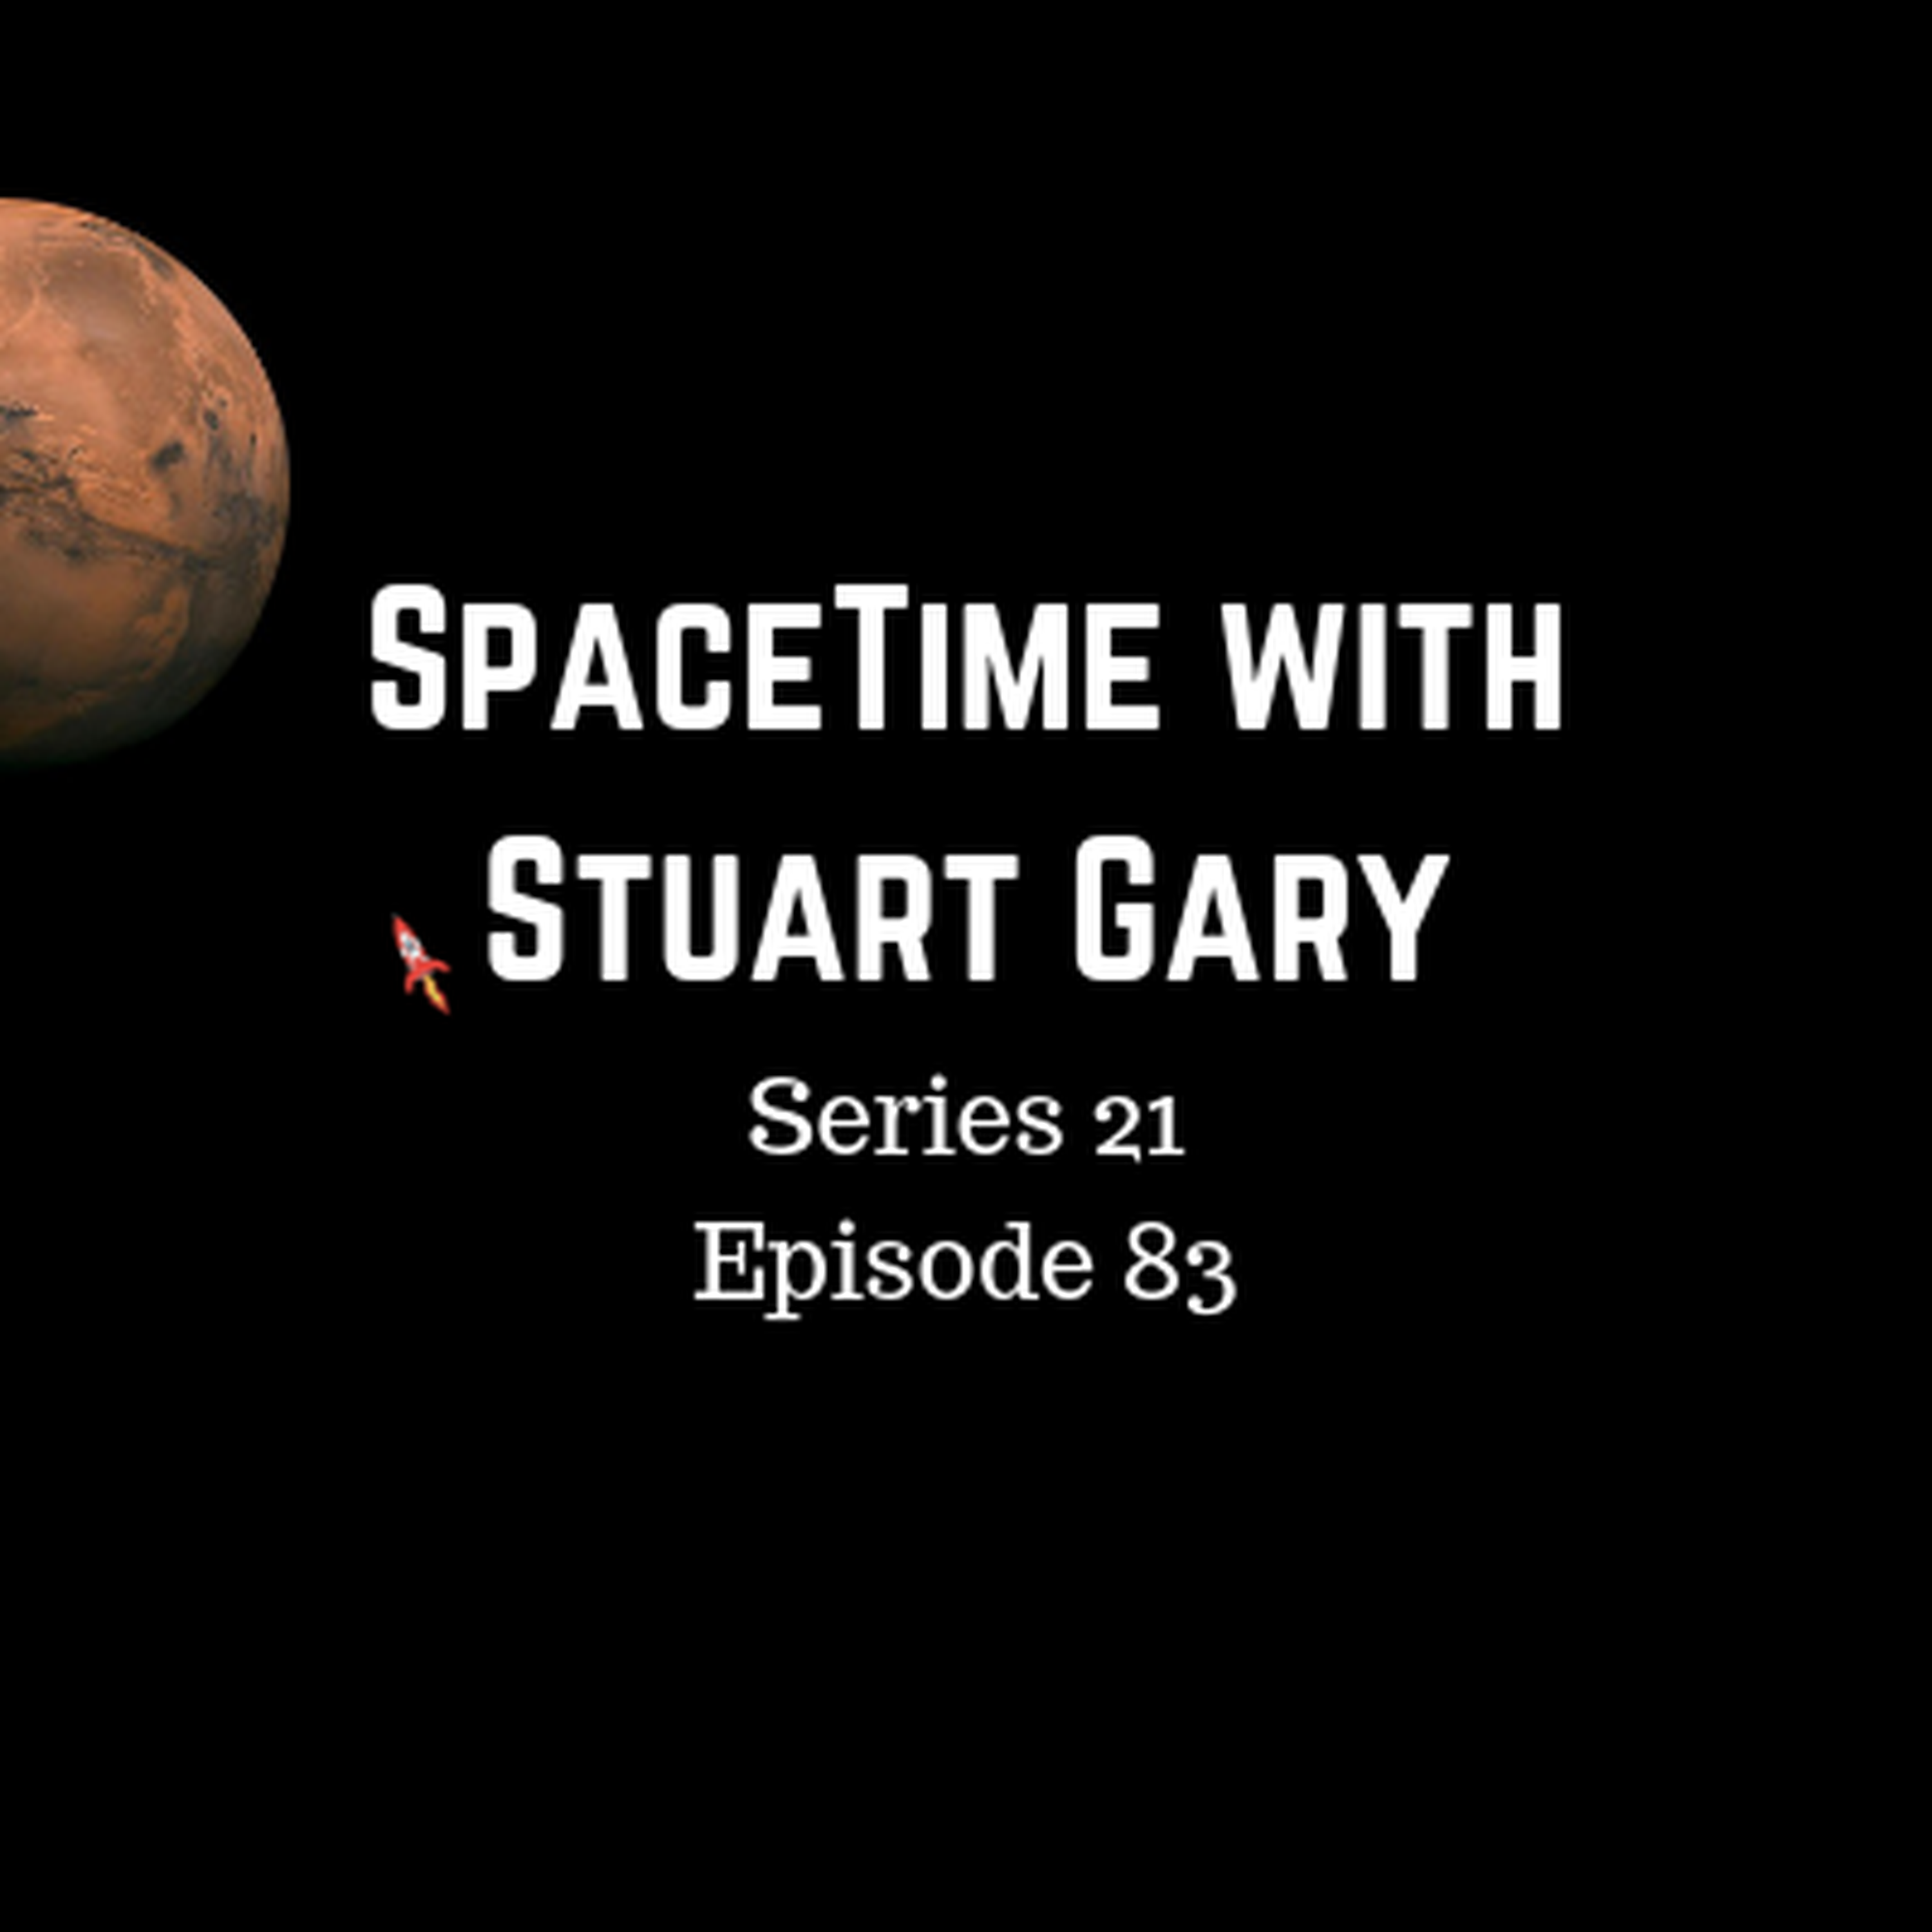 83: Ancient Mars Could Have Had Life